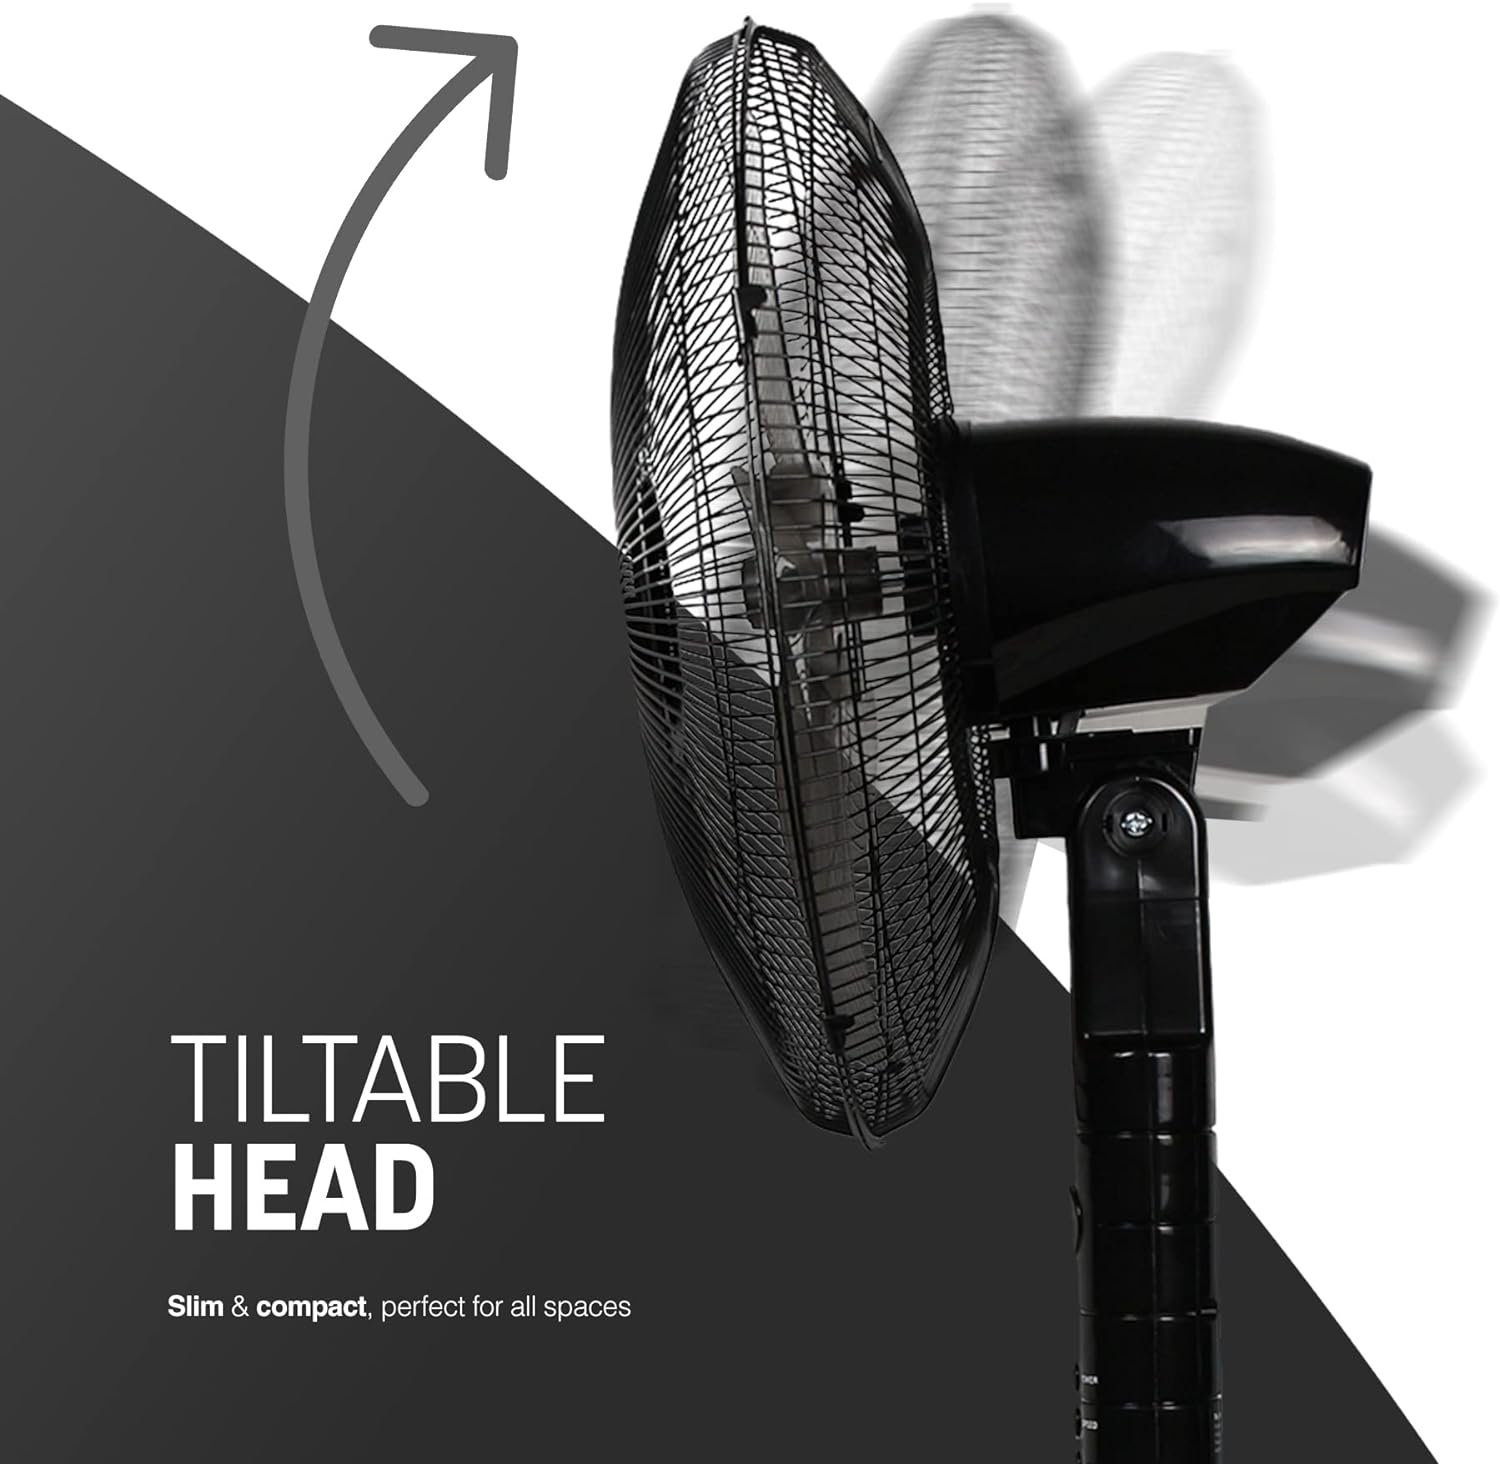 KEPLIN Pedestal Fan with Turbo Wind and Remote Control - 60W, 3-Speed Settings, 7.5-Hour Timer, Oscillating, Adjustable Height and Tilt Head - Ideal fans for Home or Office